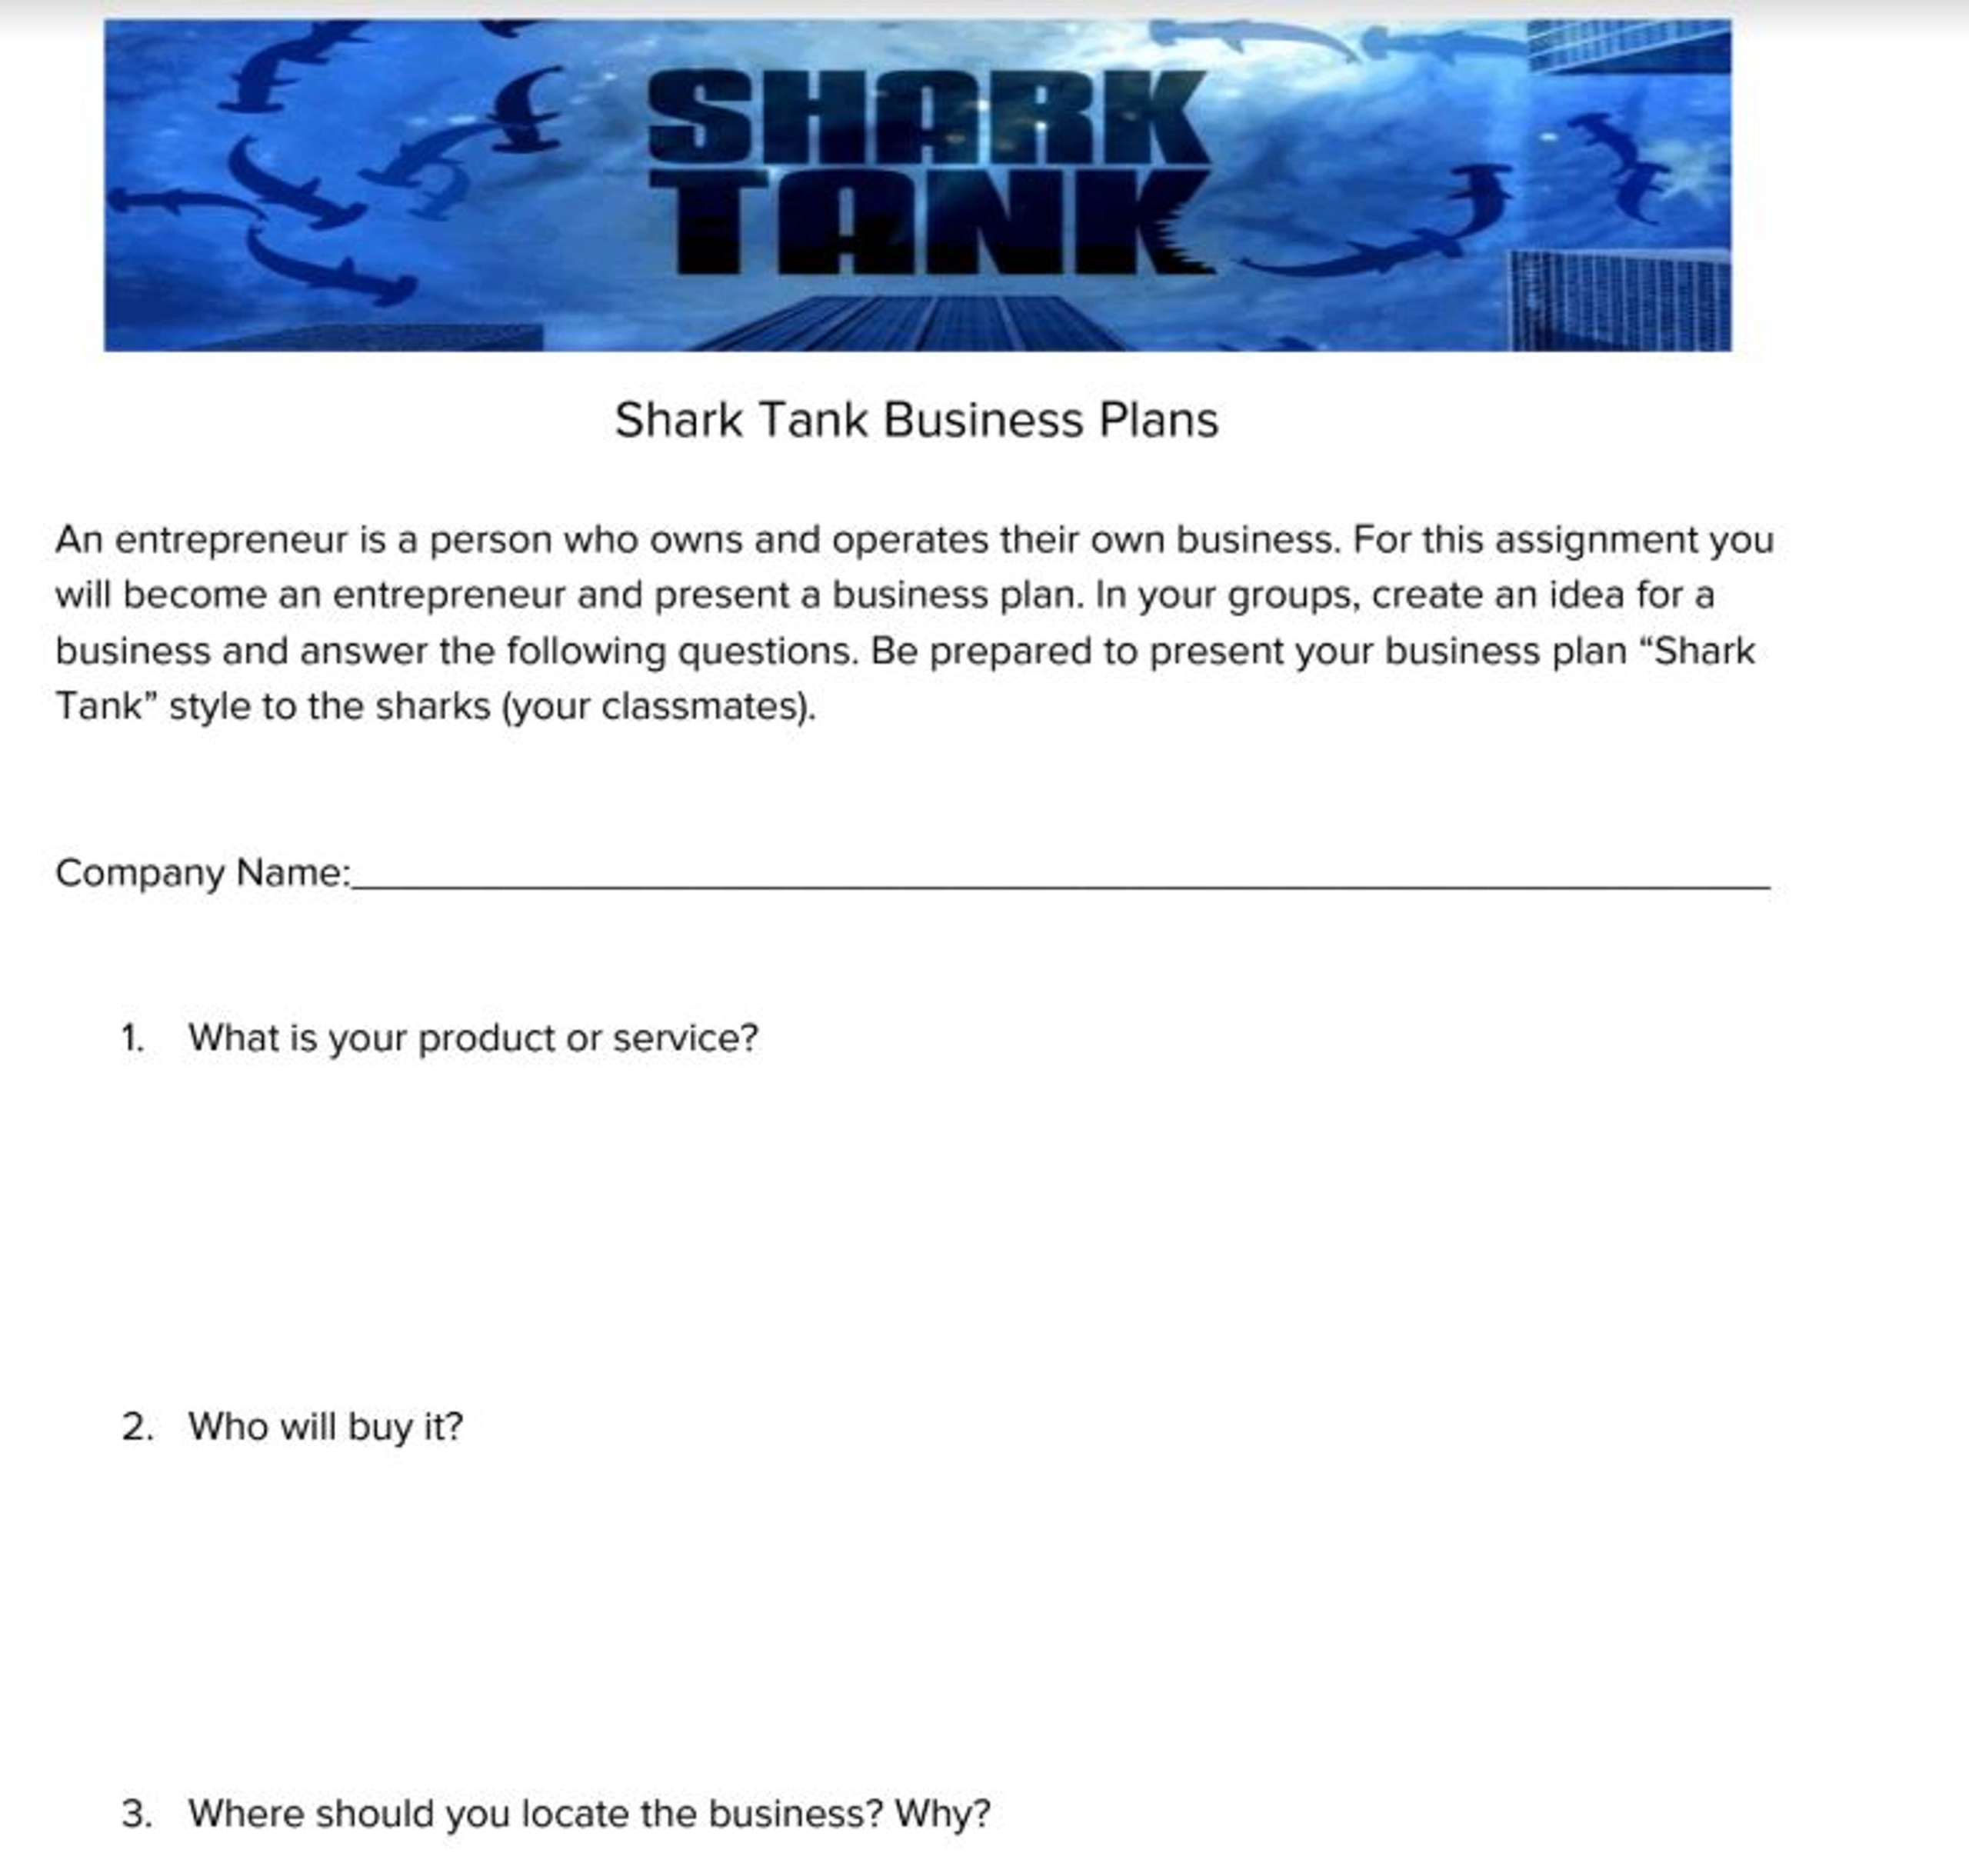 Shark Tank Business Plans Amped Up Learning